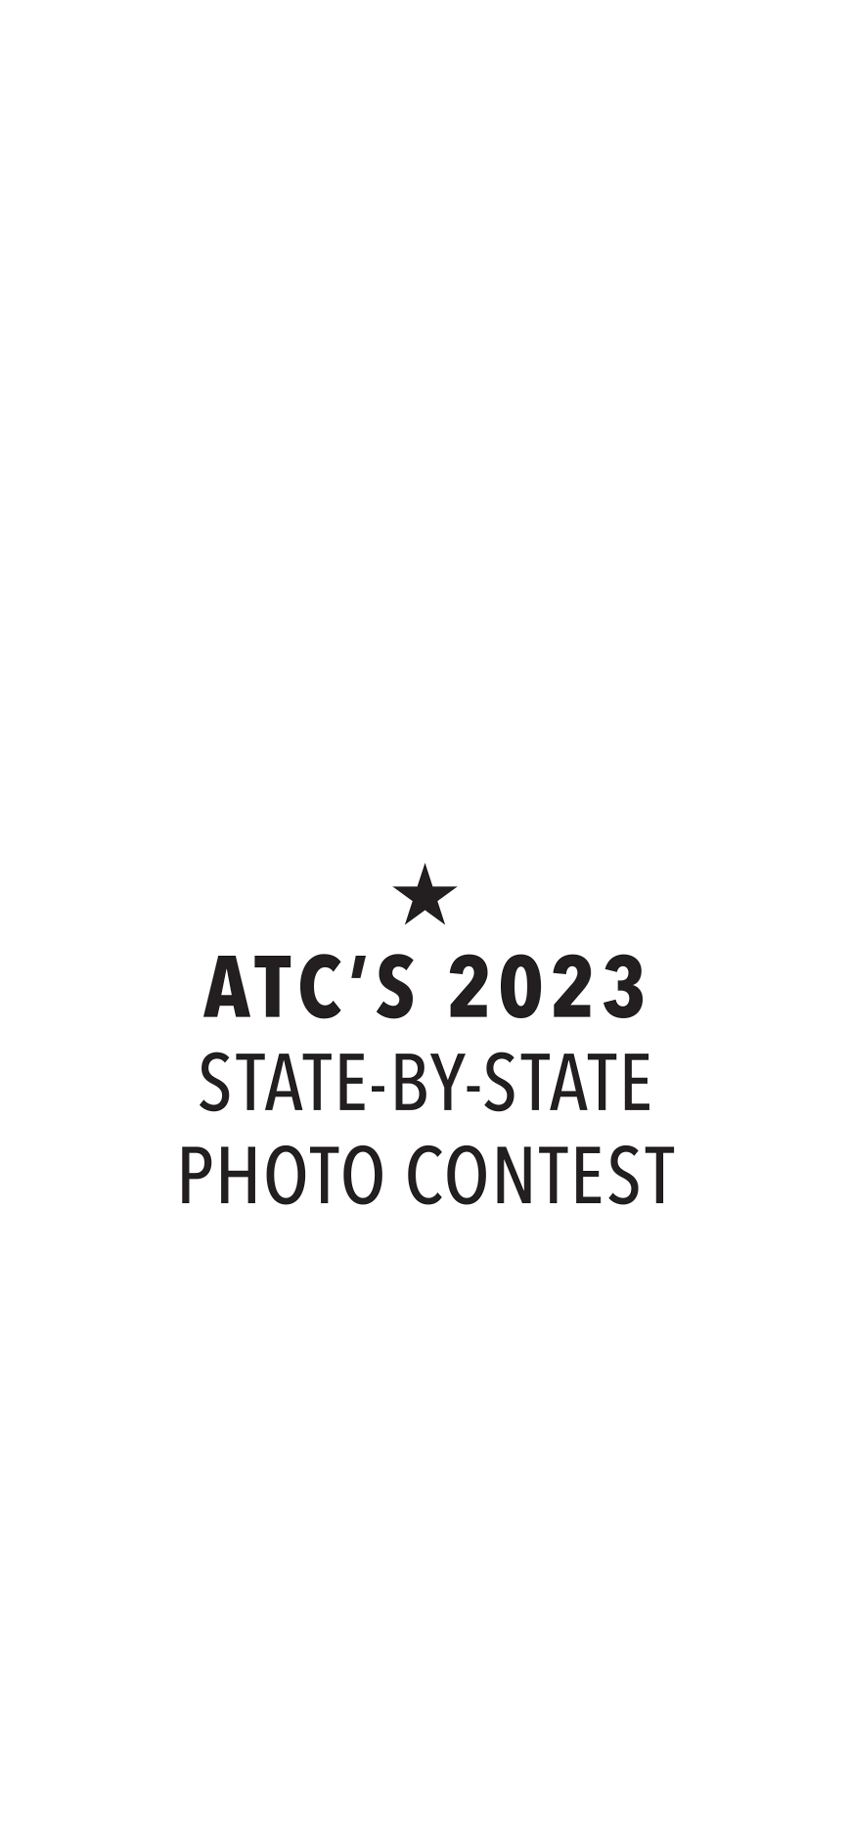 ATC's 2023 State-By-State Photo Contest typographic title